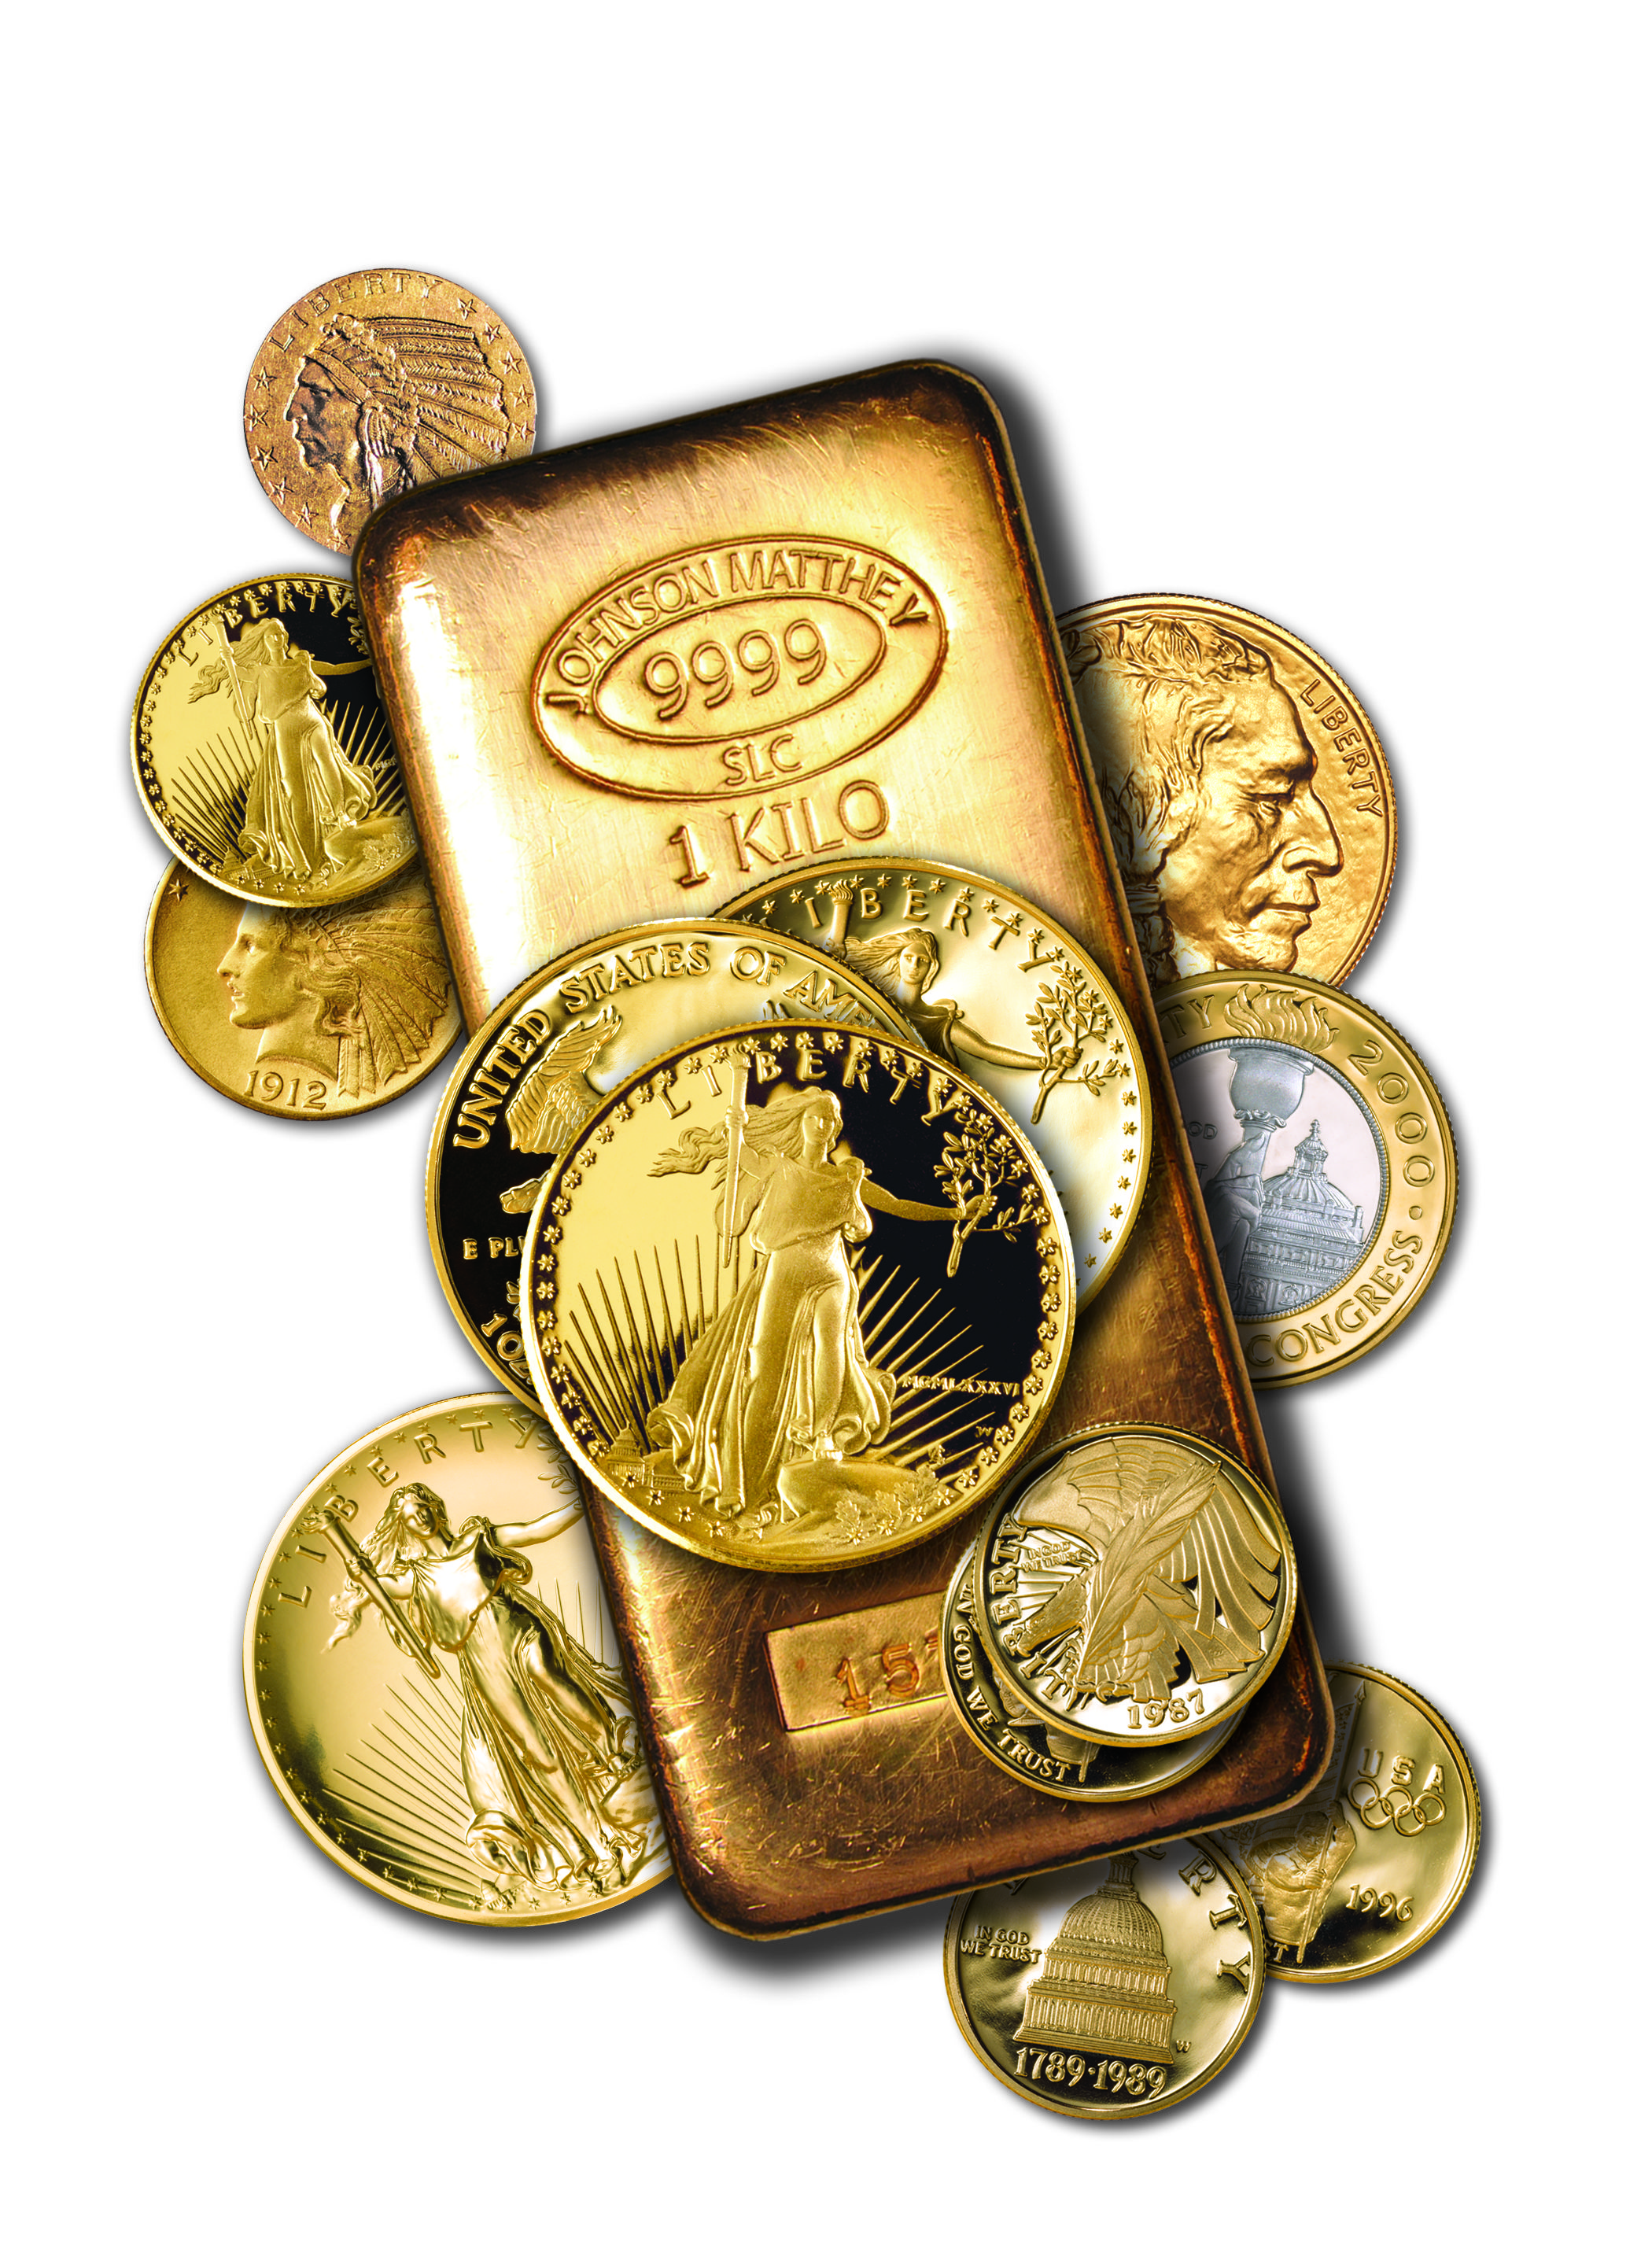 U.S. Gold News Commentary and analysis of precious metals ma